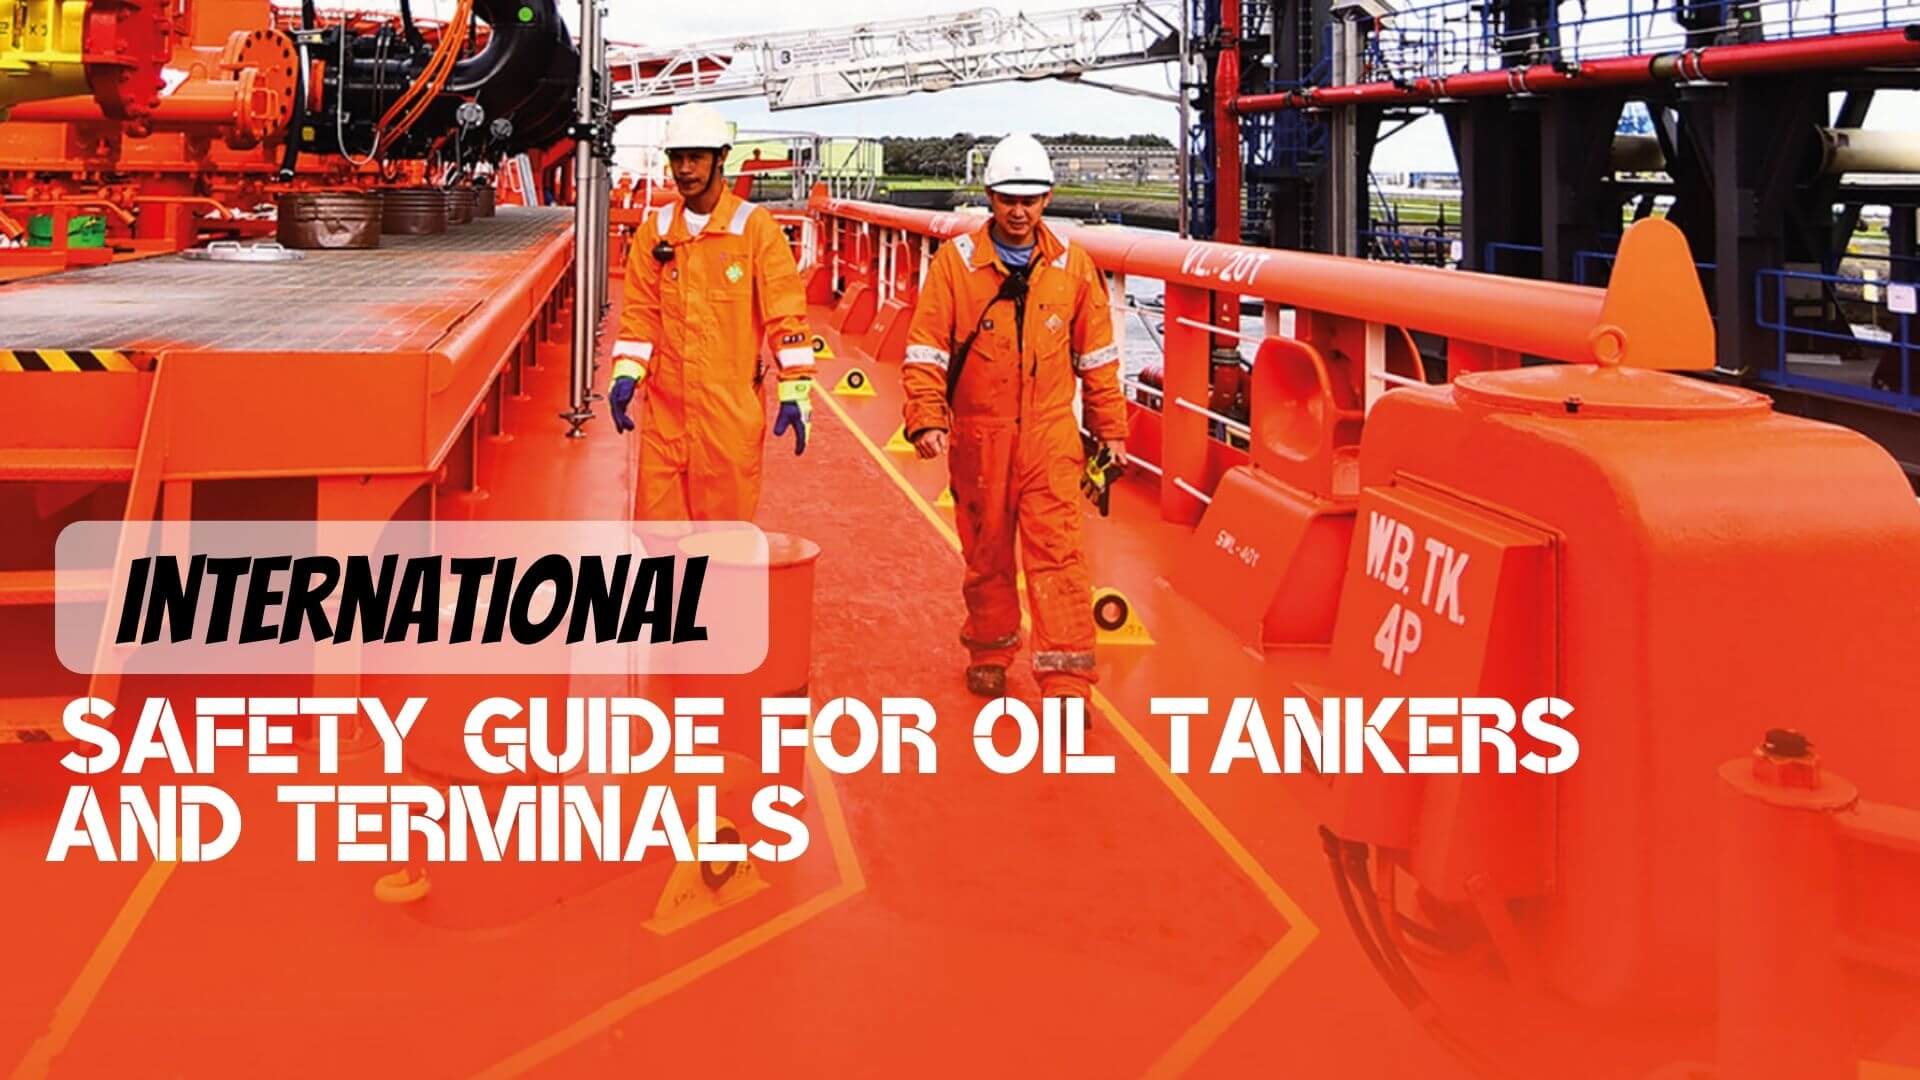 International Safety Guide for Oil Tankers and Terminals